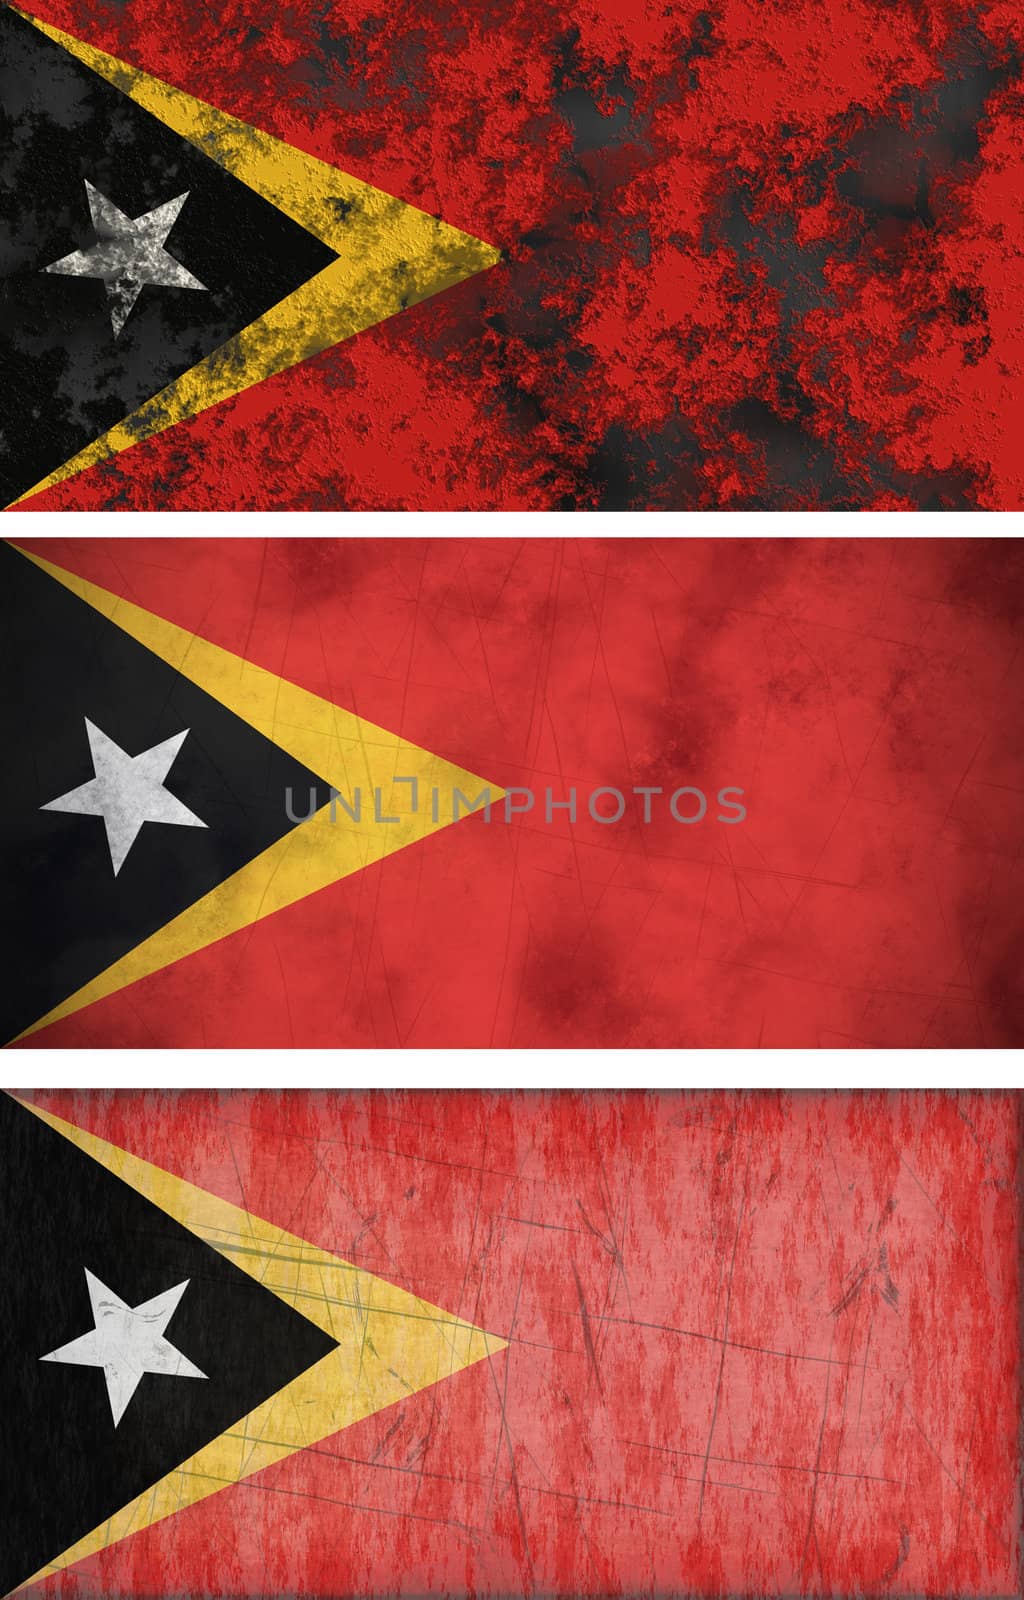 Great Image of the Flag of East Timor